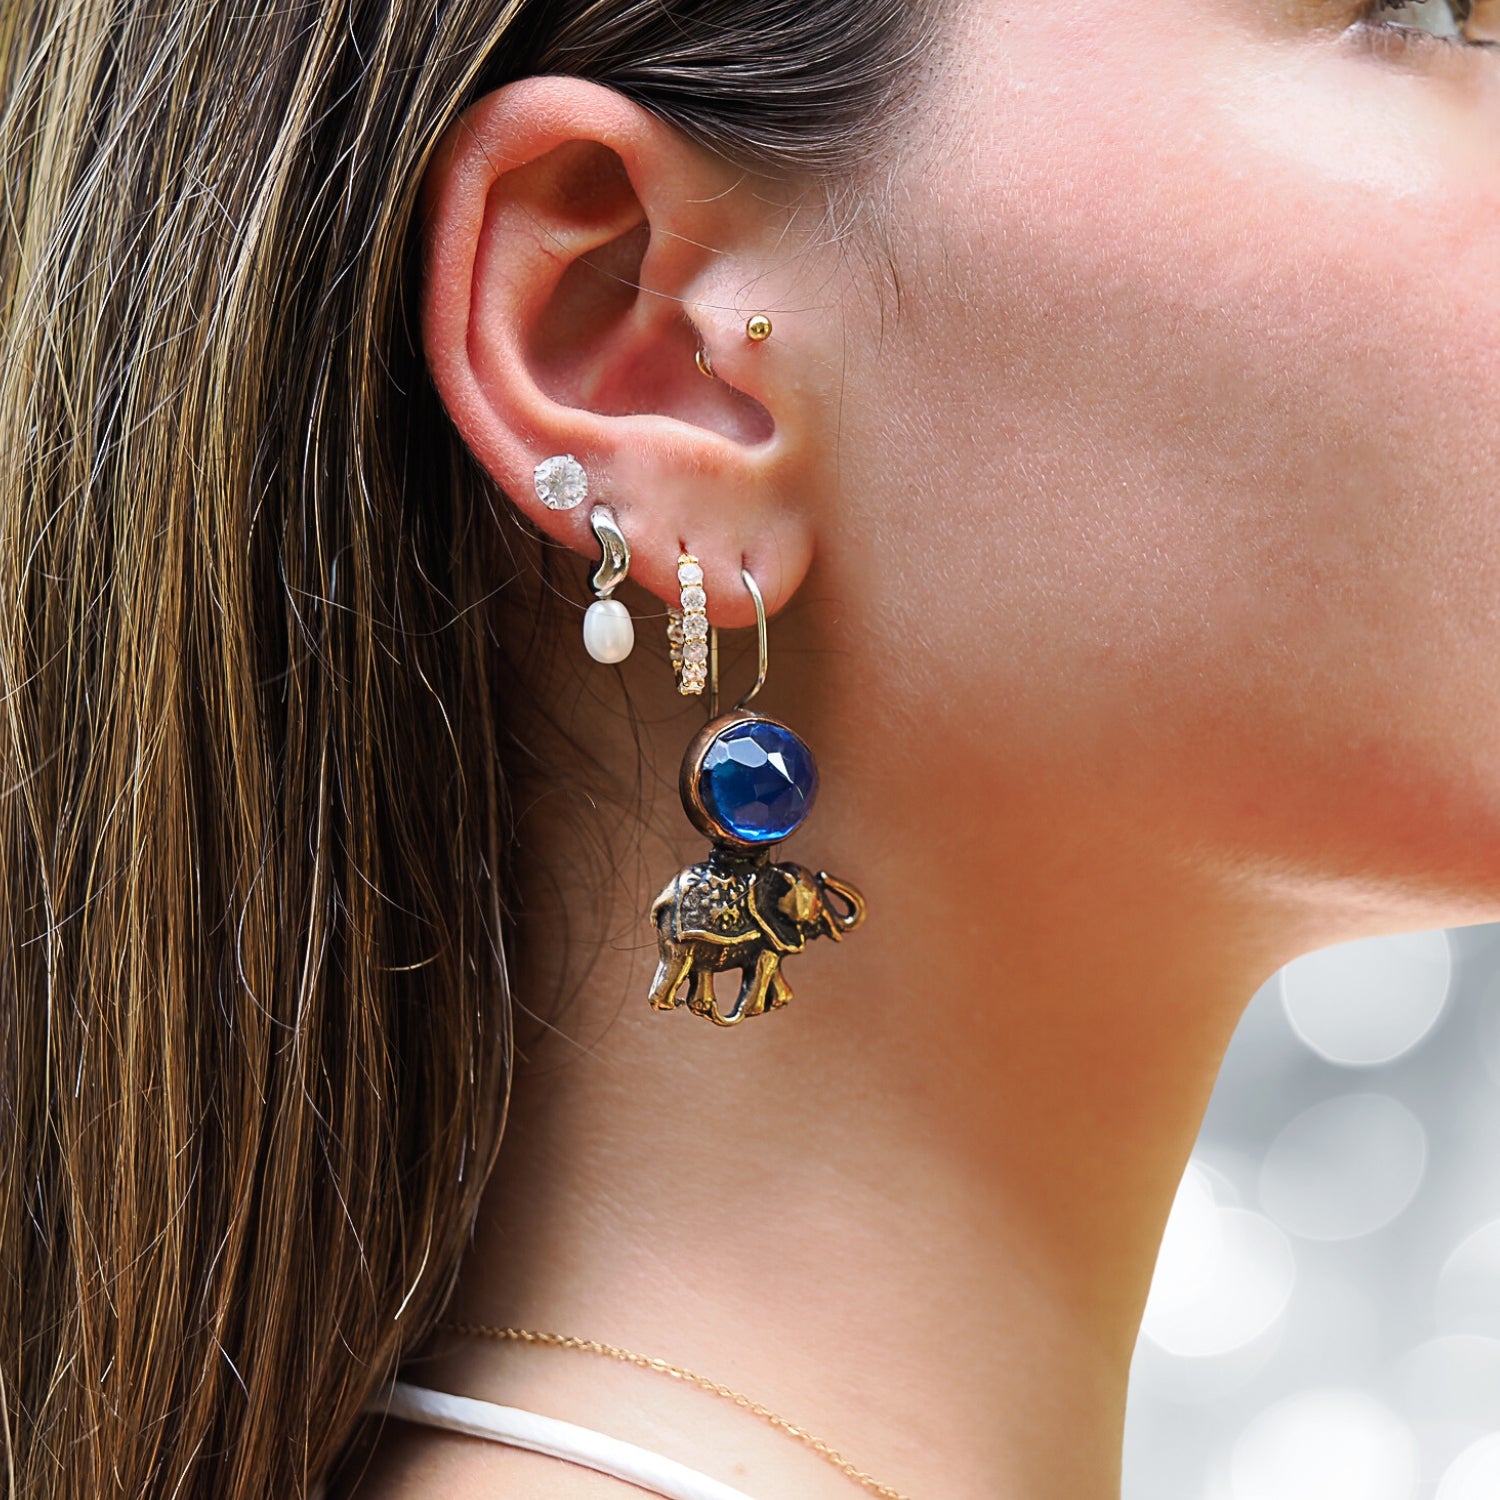 Elephant Earrings featuring handmade bronze charms and sapphire gemstones, a unique addition to your jewelry collection.